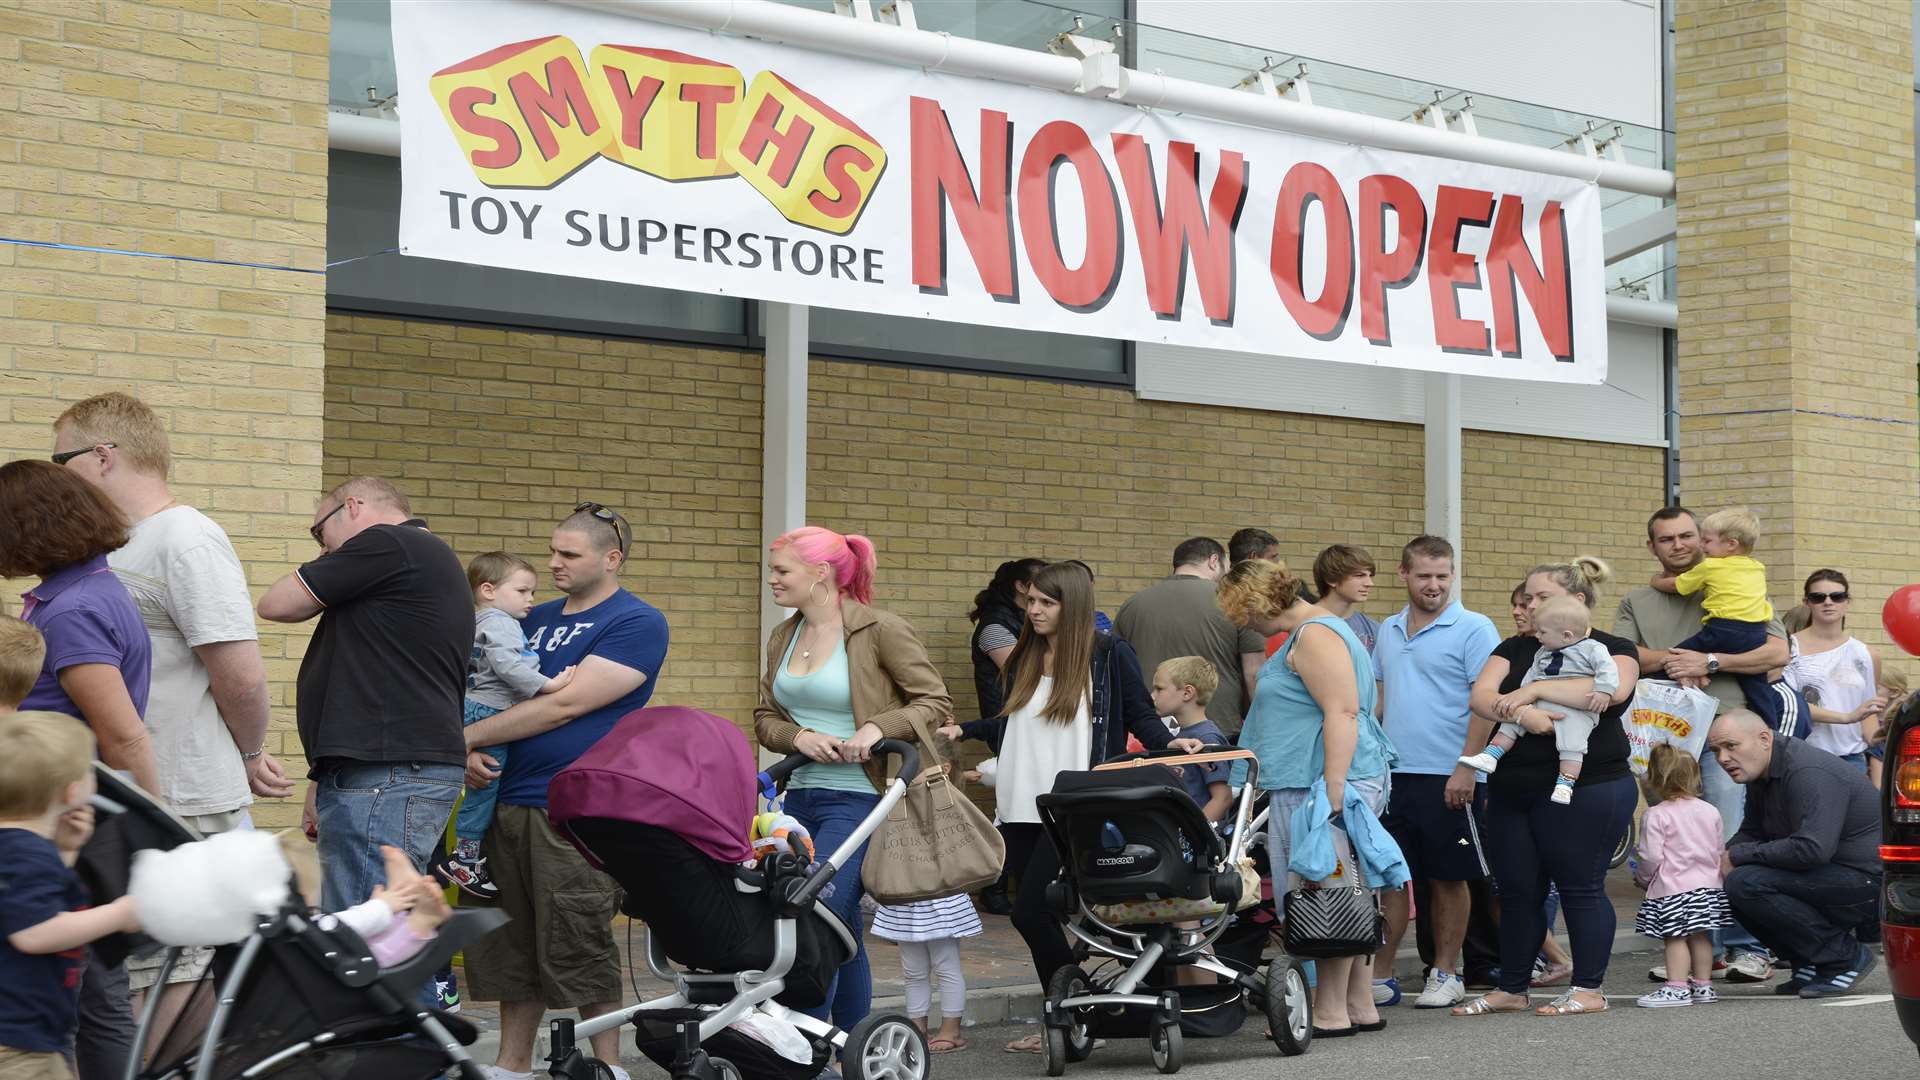 Queues outside the Smyths store opening at the South Aylesford Retail Park in 2013.